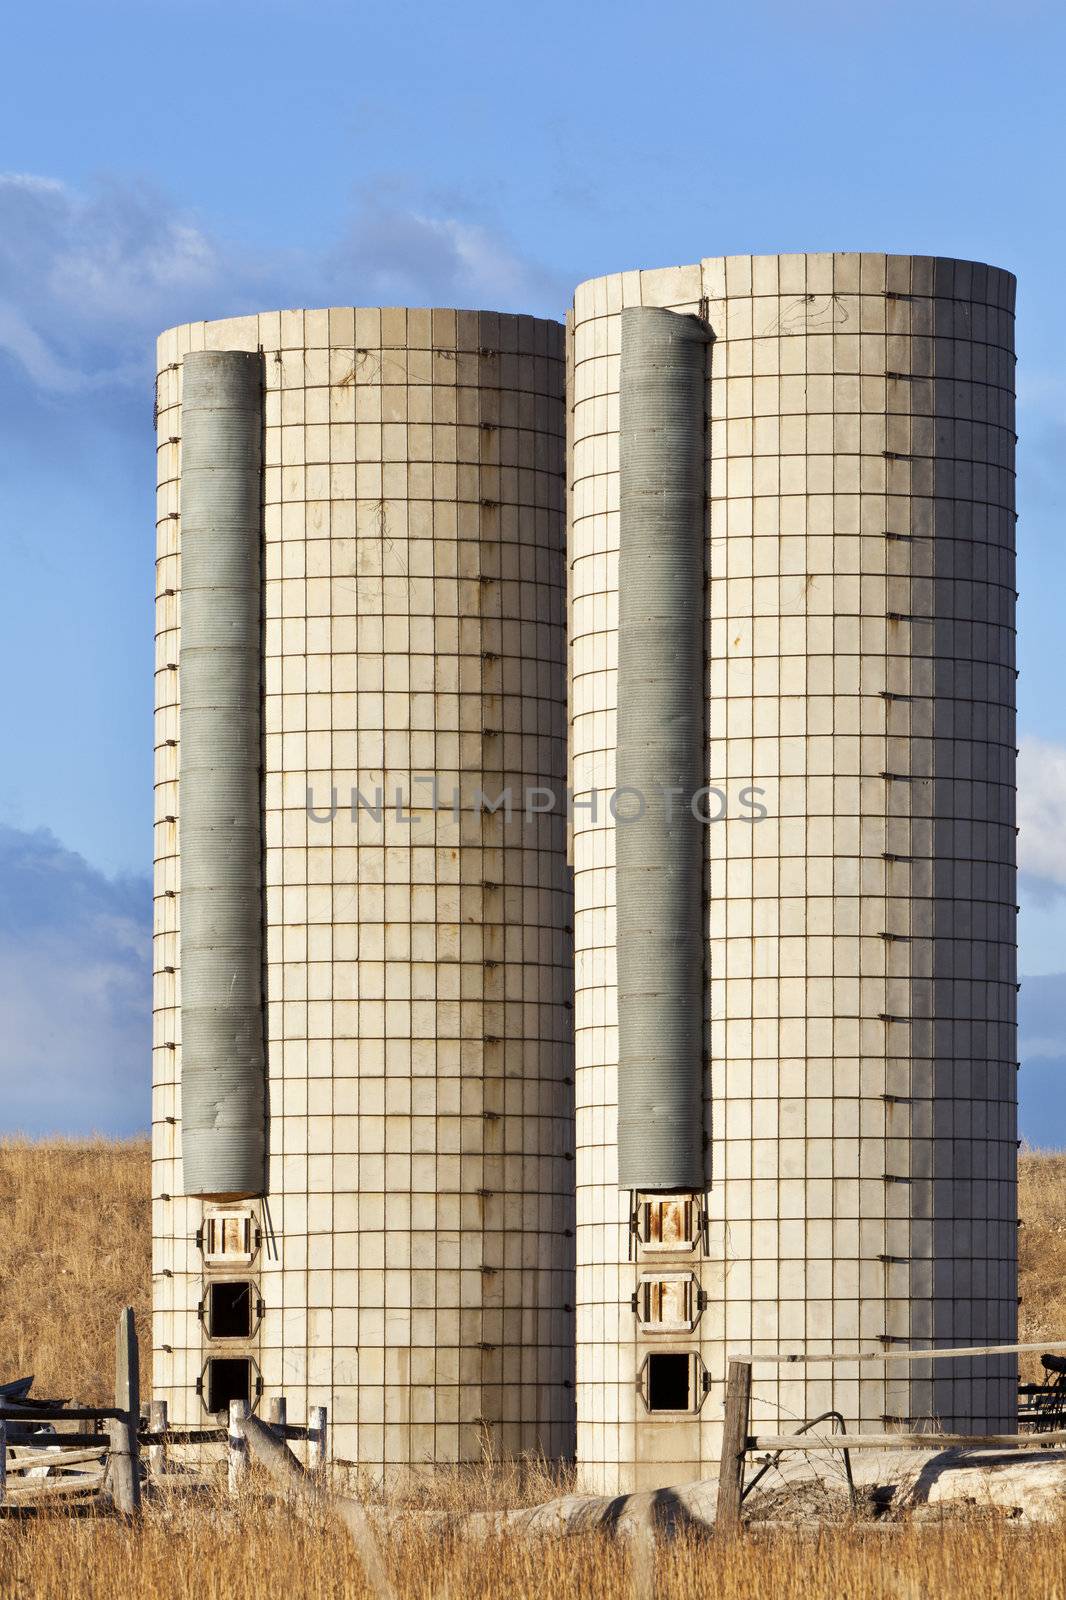 two old  cylindrical silos on an abandoned farm in eastern Colorado